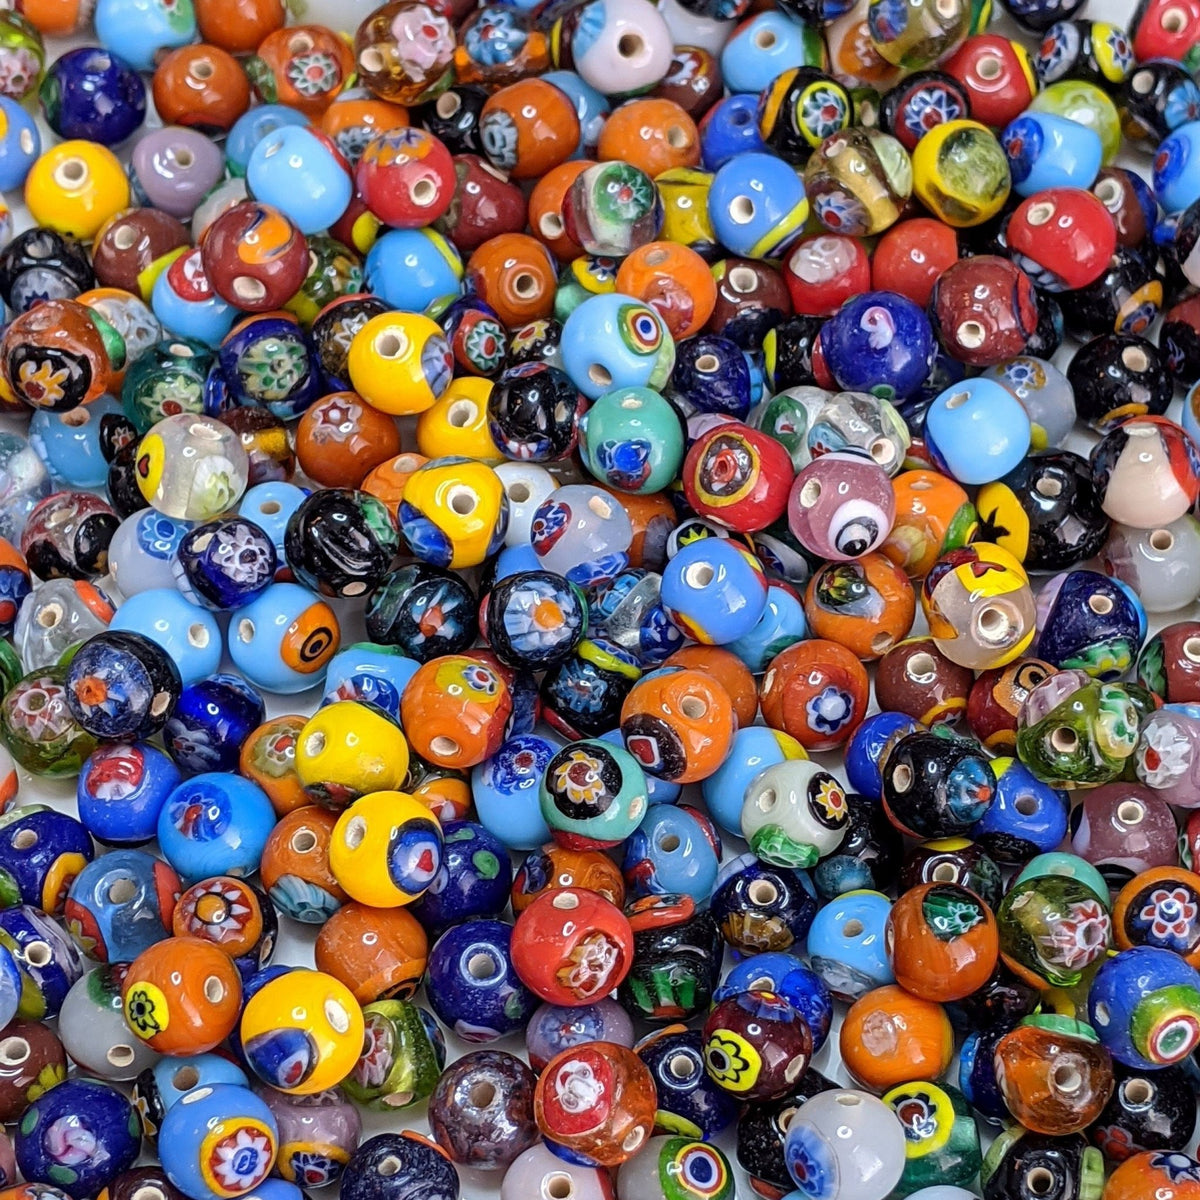 19 Mixed Color Lampwork Glass Beads - 8mm to 17mm Mixed Beads